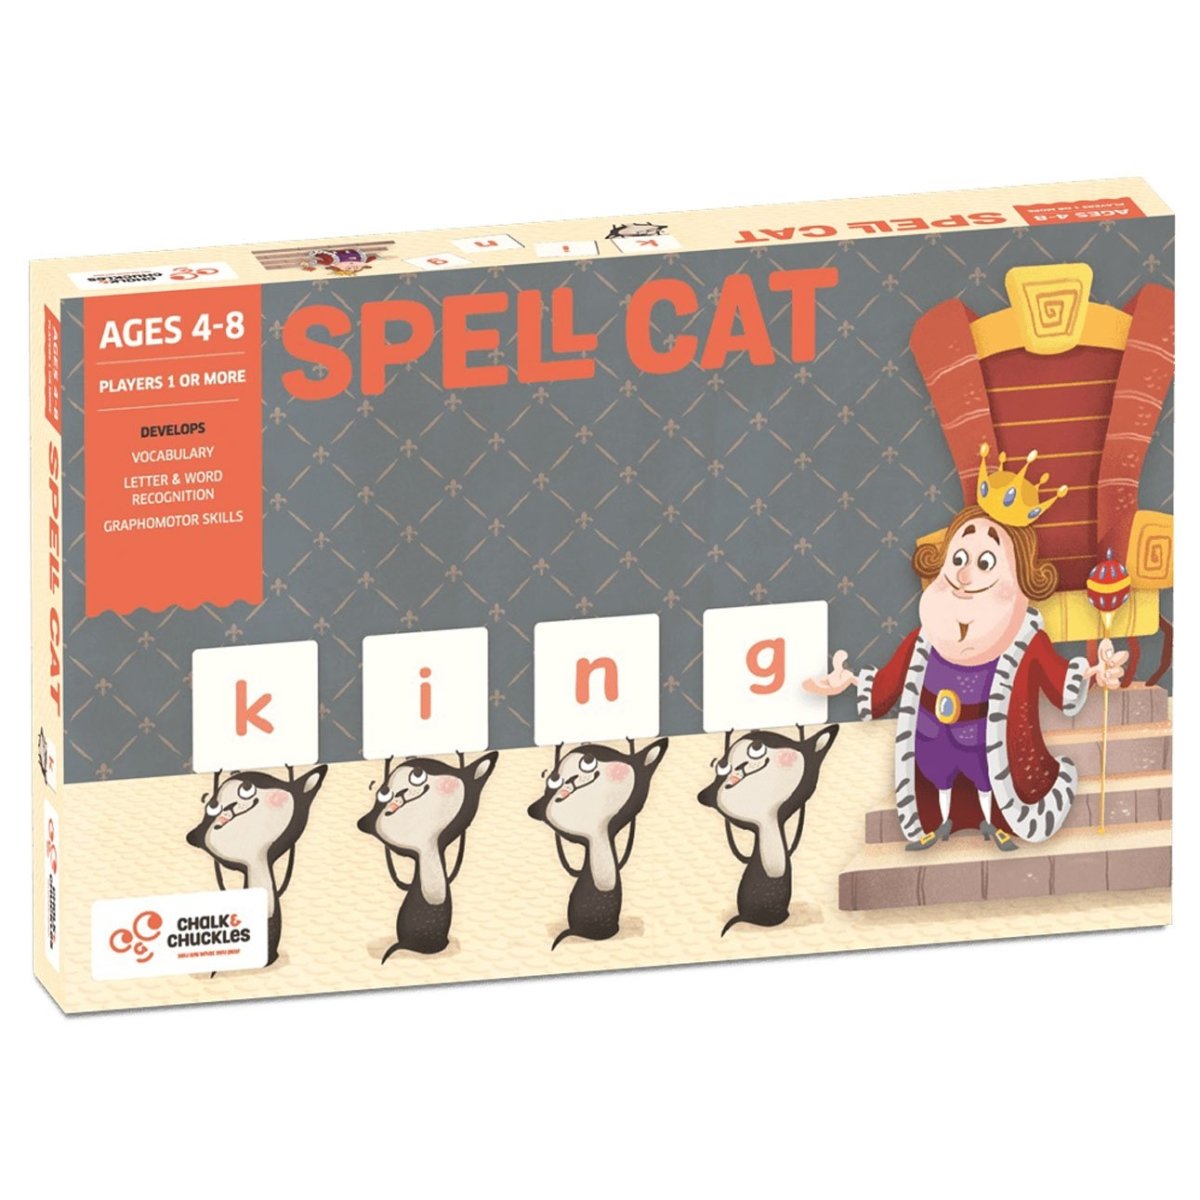 ZCC Spell Cat - Age to 8 freeshipping - Zigyasaw